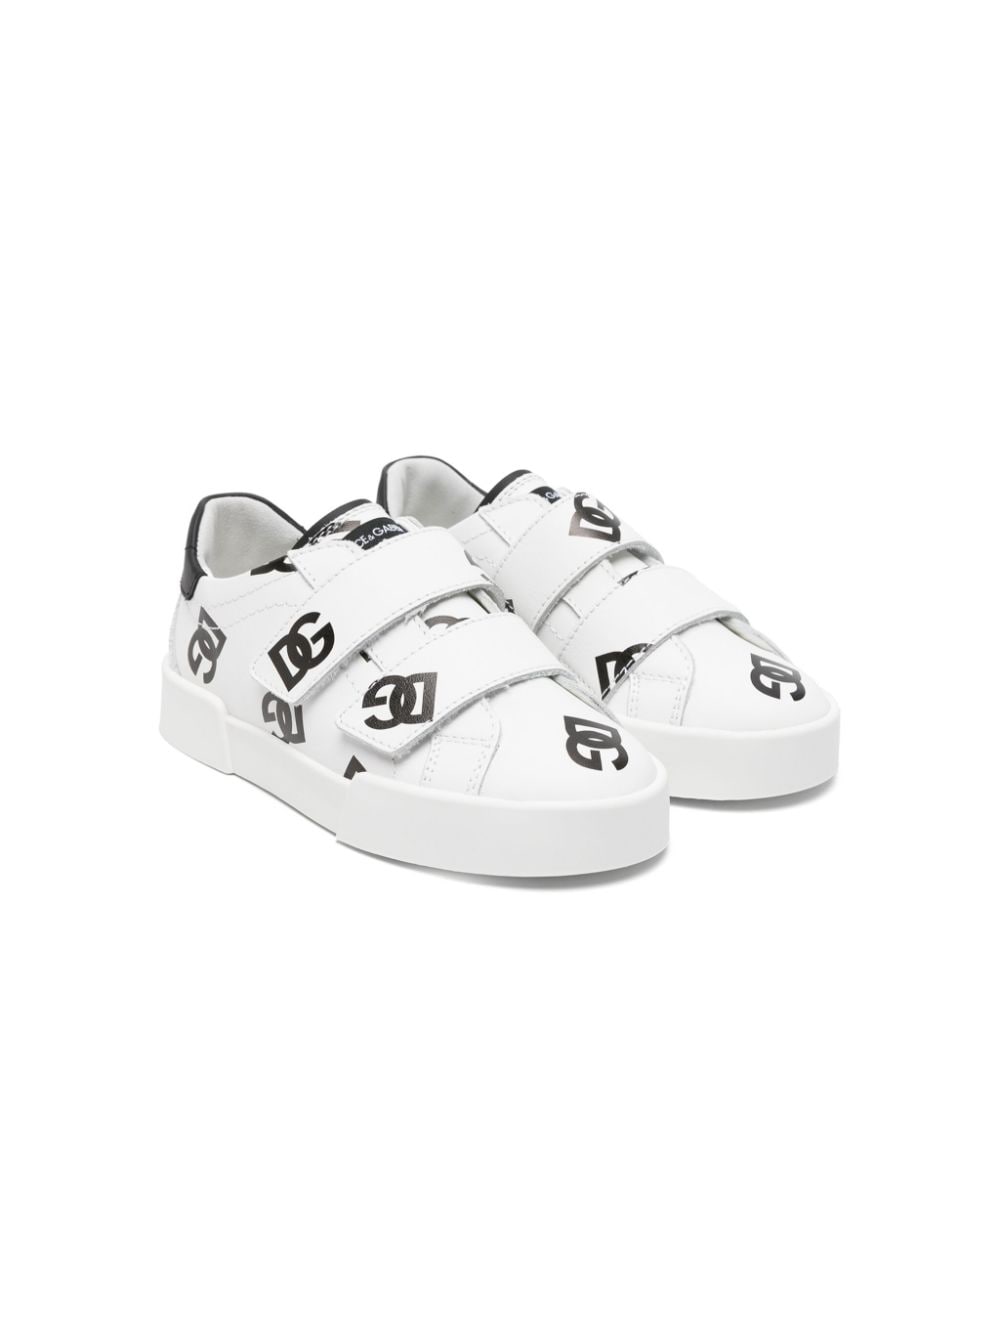 Black and white shoes for children